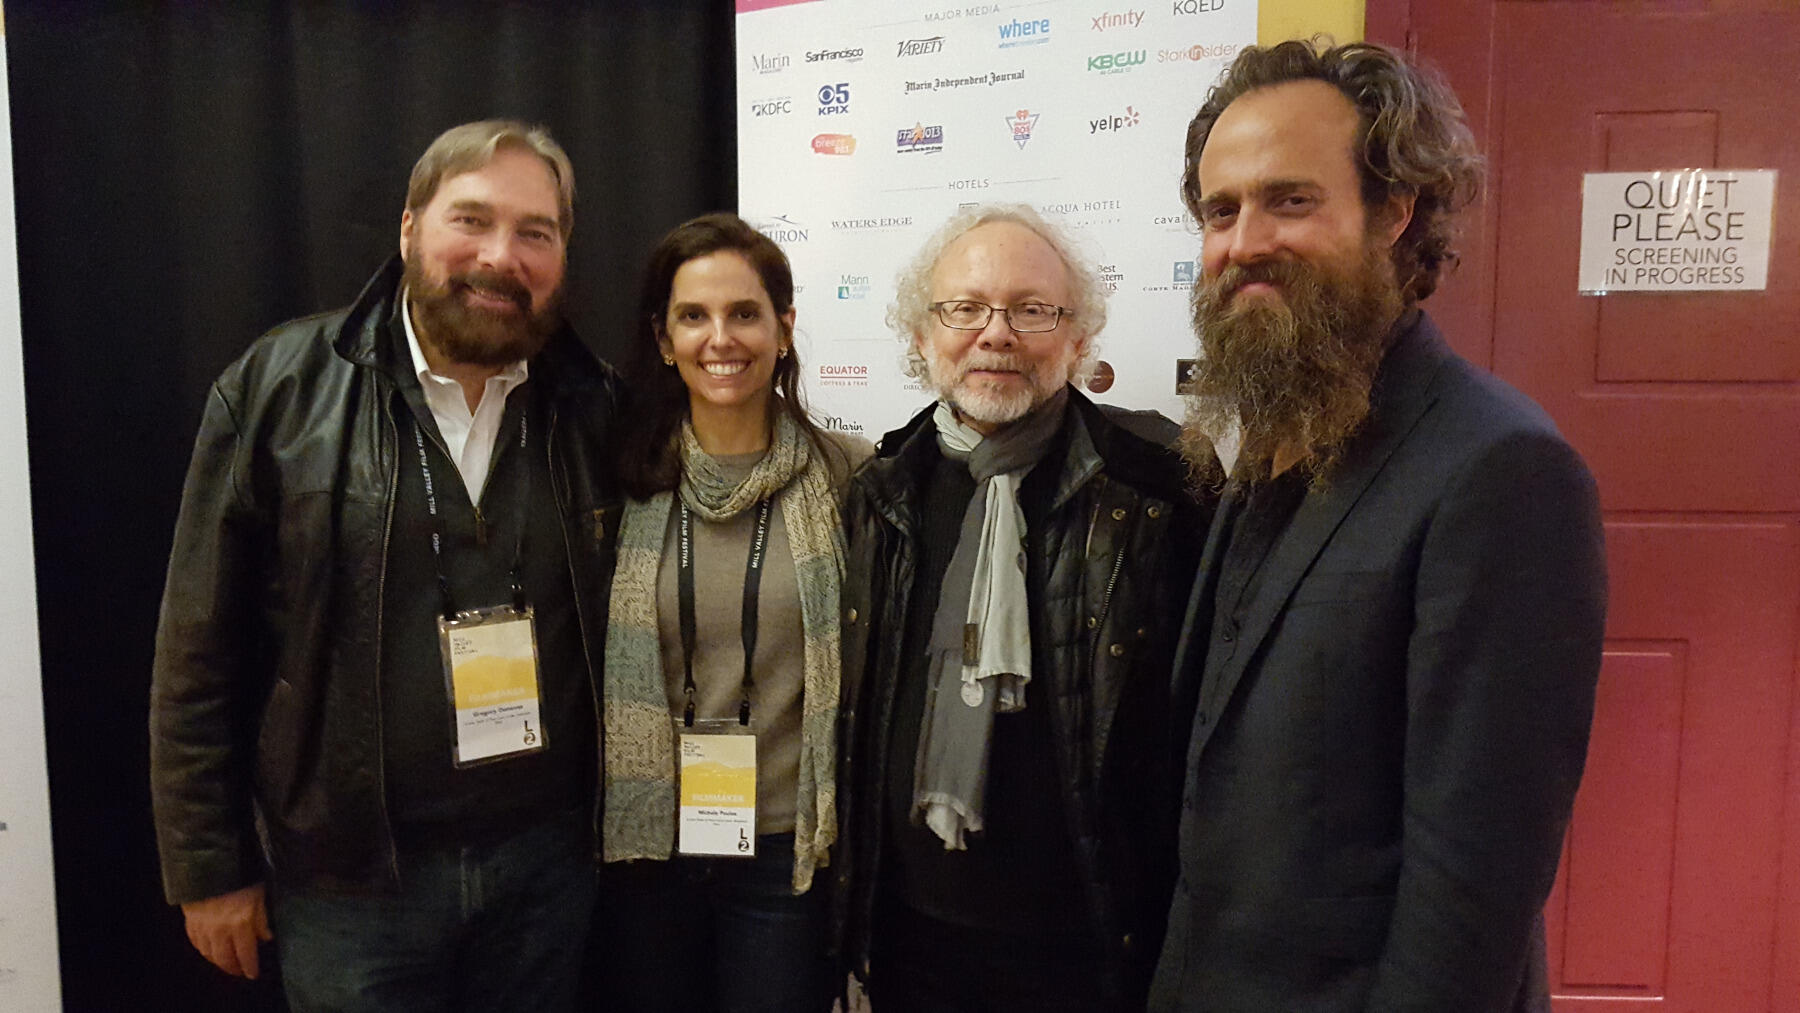 Gregory Donovan, Michele Poulos, David St. John and Sam Beam of Iron and Wine.